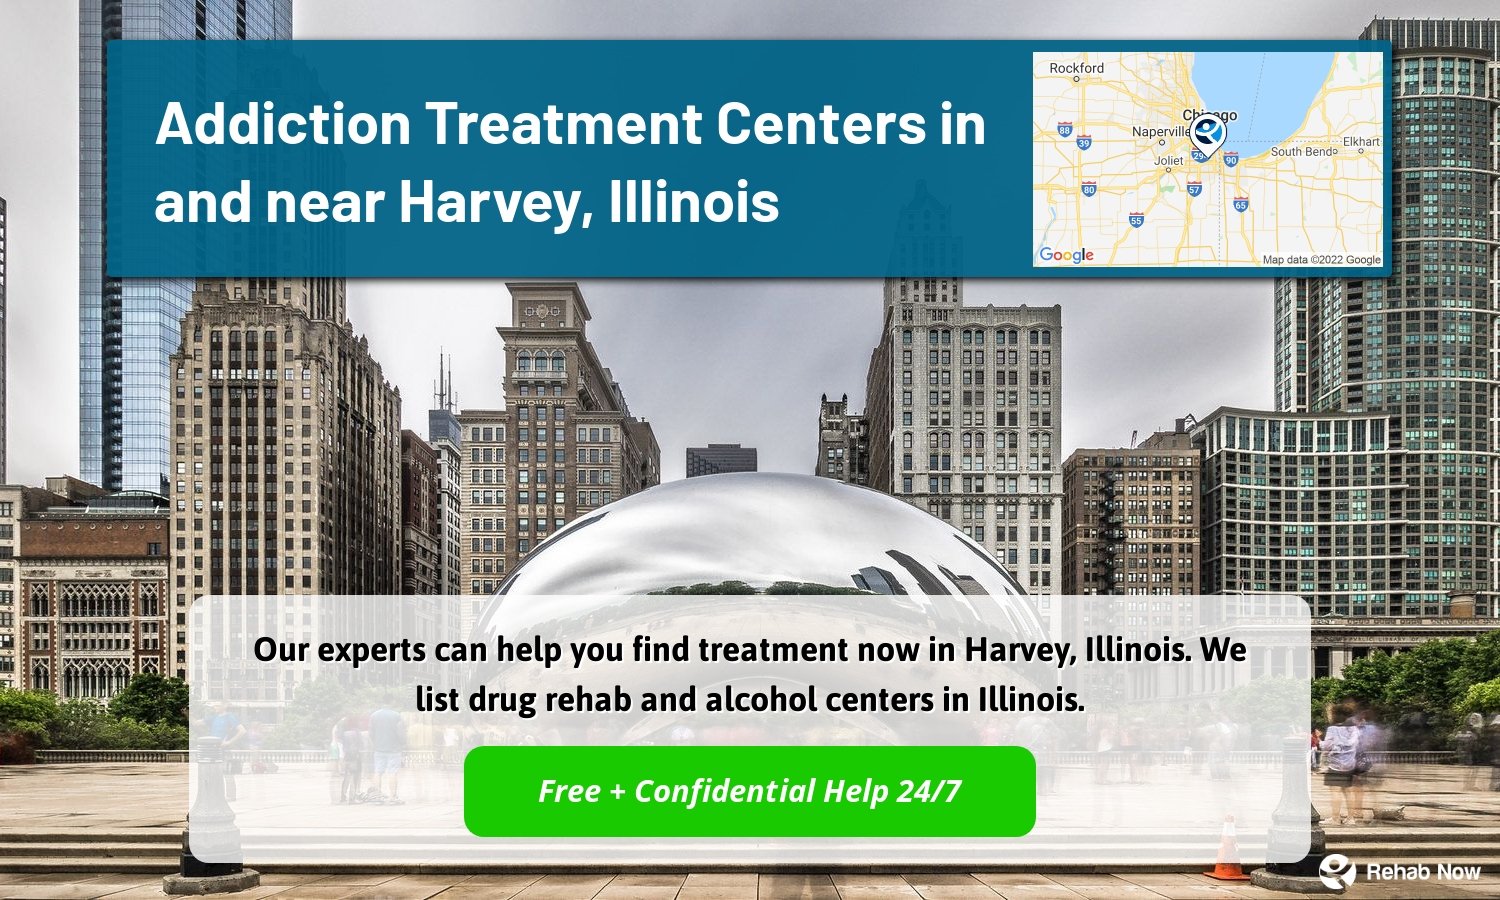 Our experts can help you find treatment now in Harvey, Illinois. We list drug rehab and alcohol centers in Illinois.